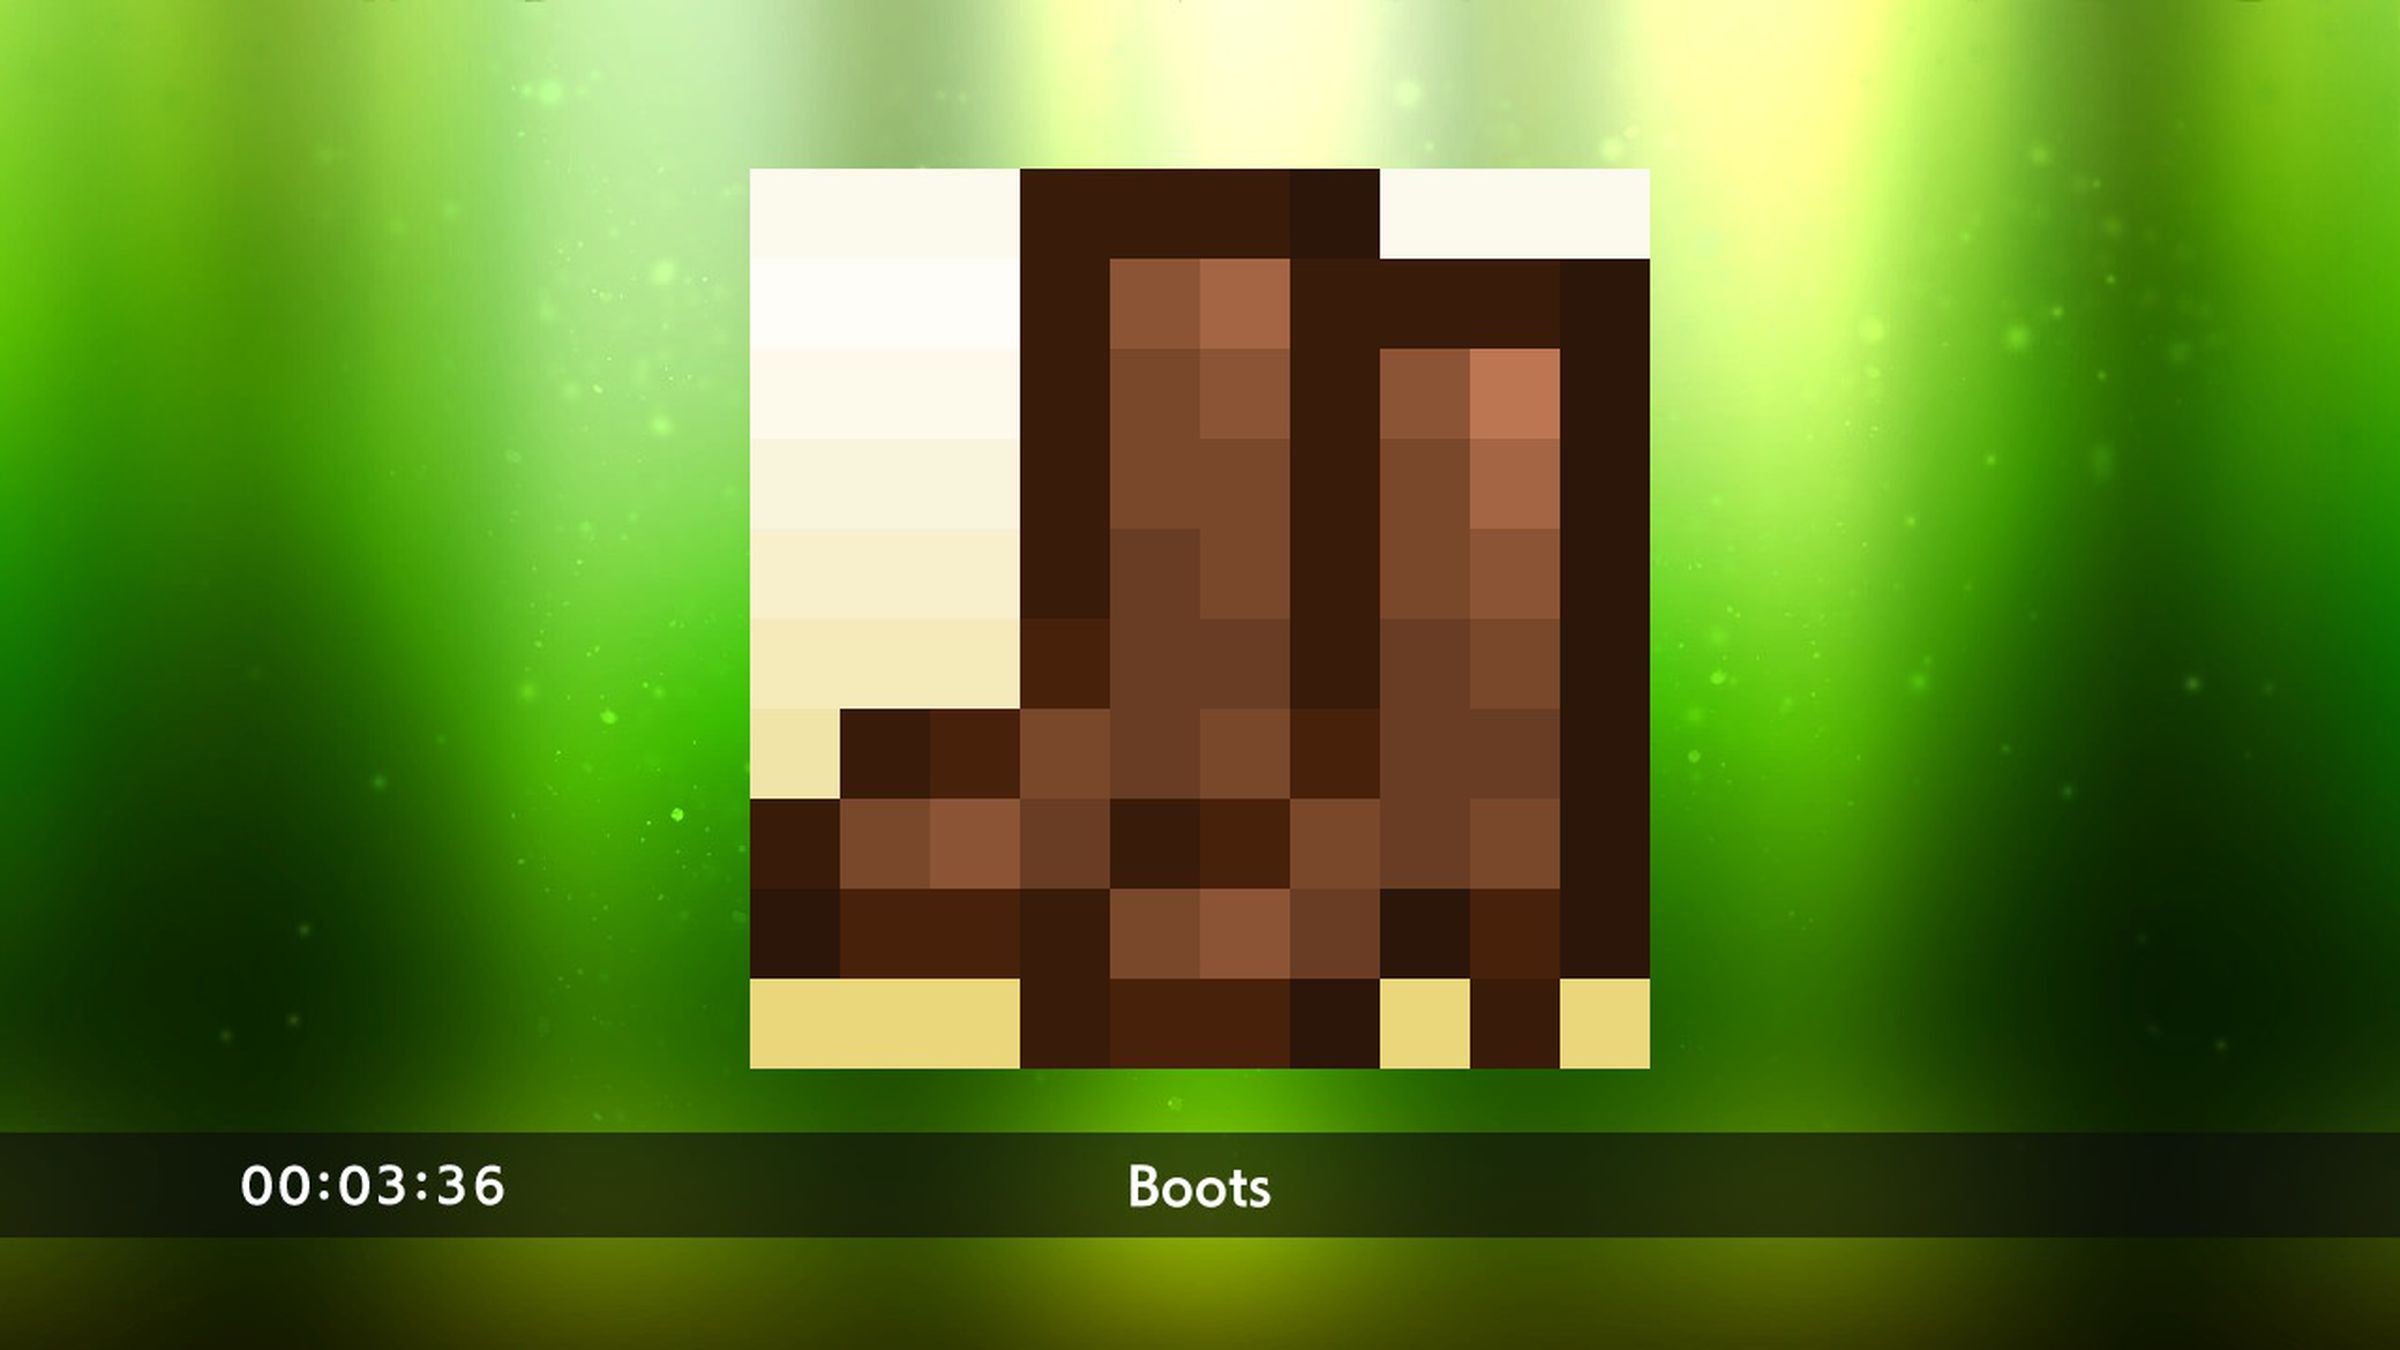 Boots puzzle from Picross S3